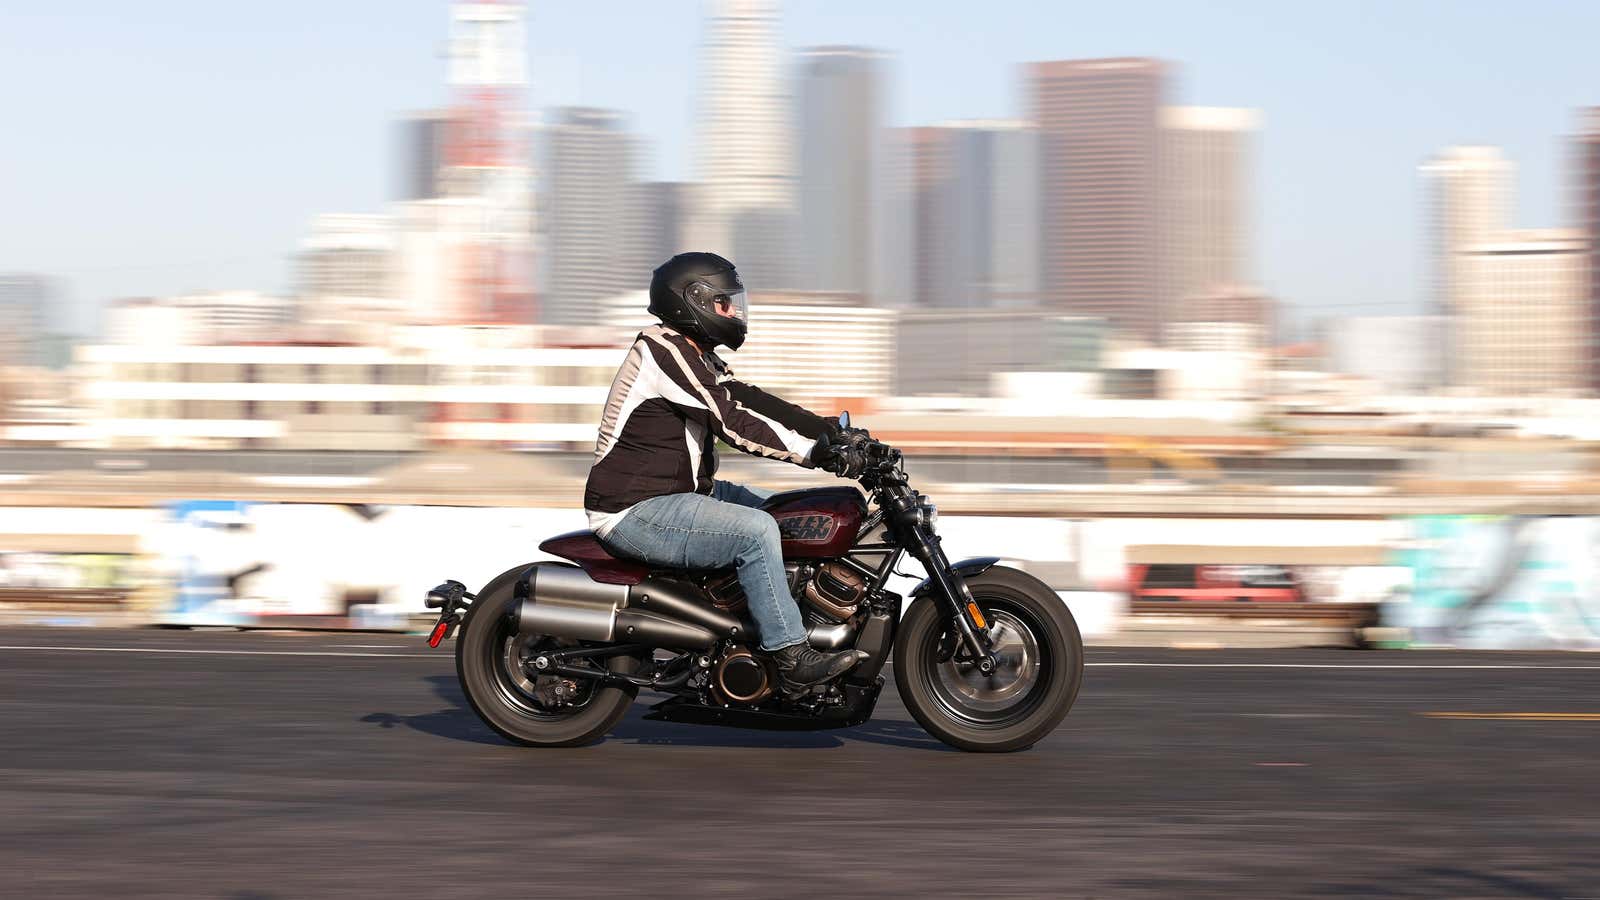 The 2022 Harley-Davidson Sportster S Is A Paradigm Shift